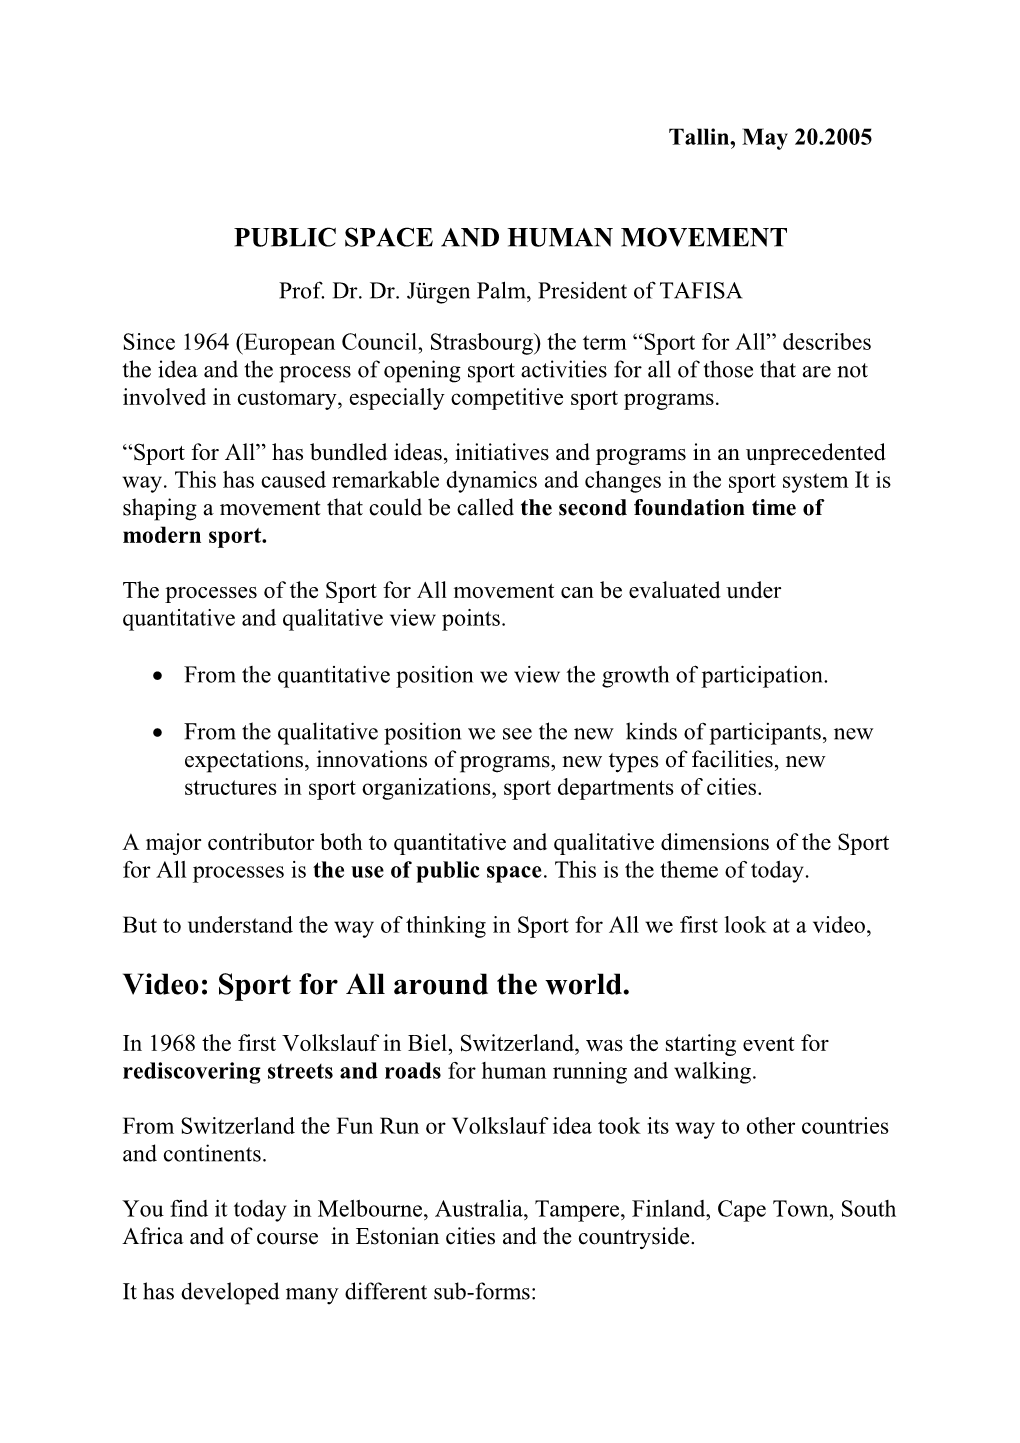 Public Space and Human Movement